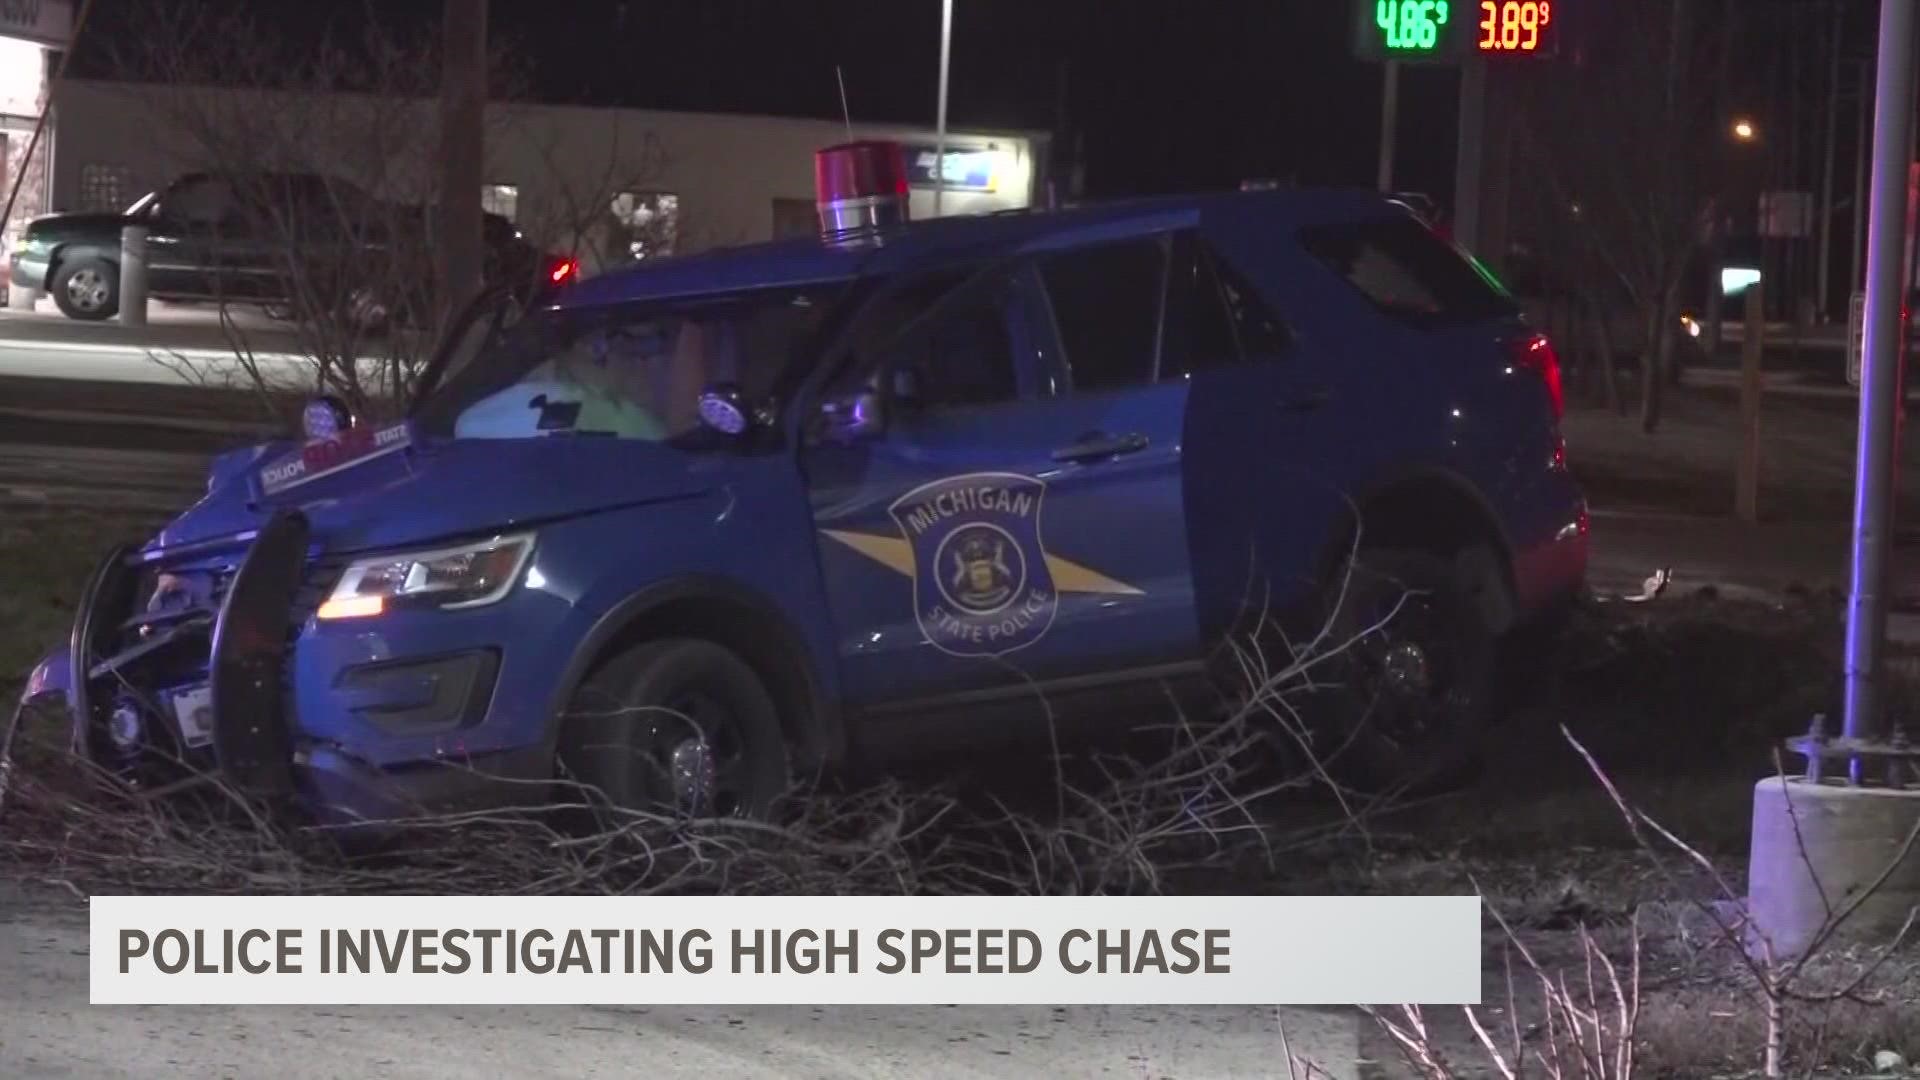 Two people are in custody following a car chase in Muskegon Heights Thursday night.